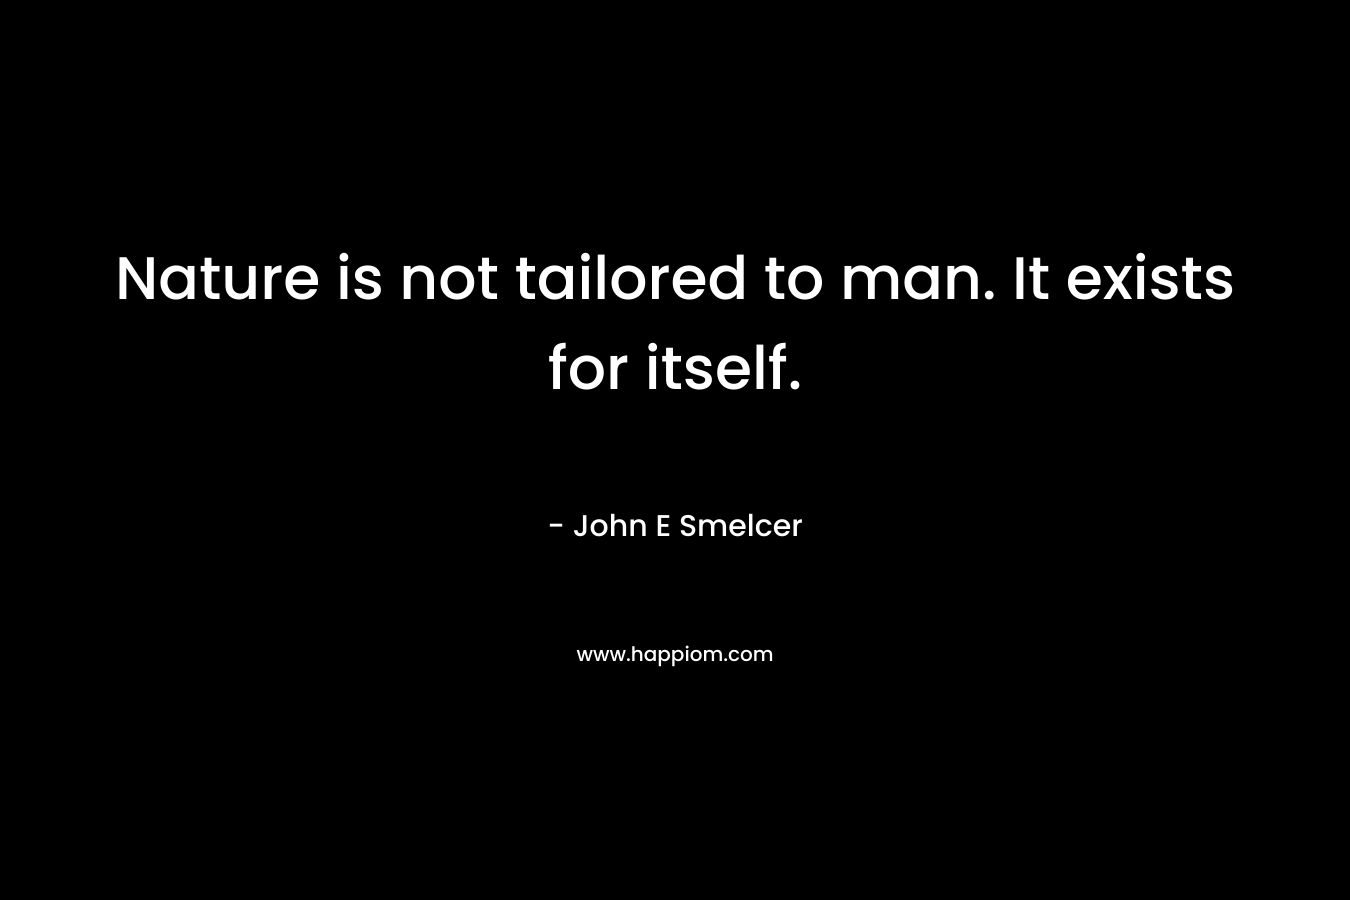 Nature is not tailored to man. It exists for itself. – John E Smelcer